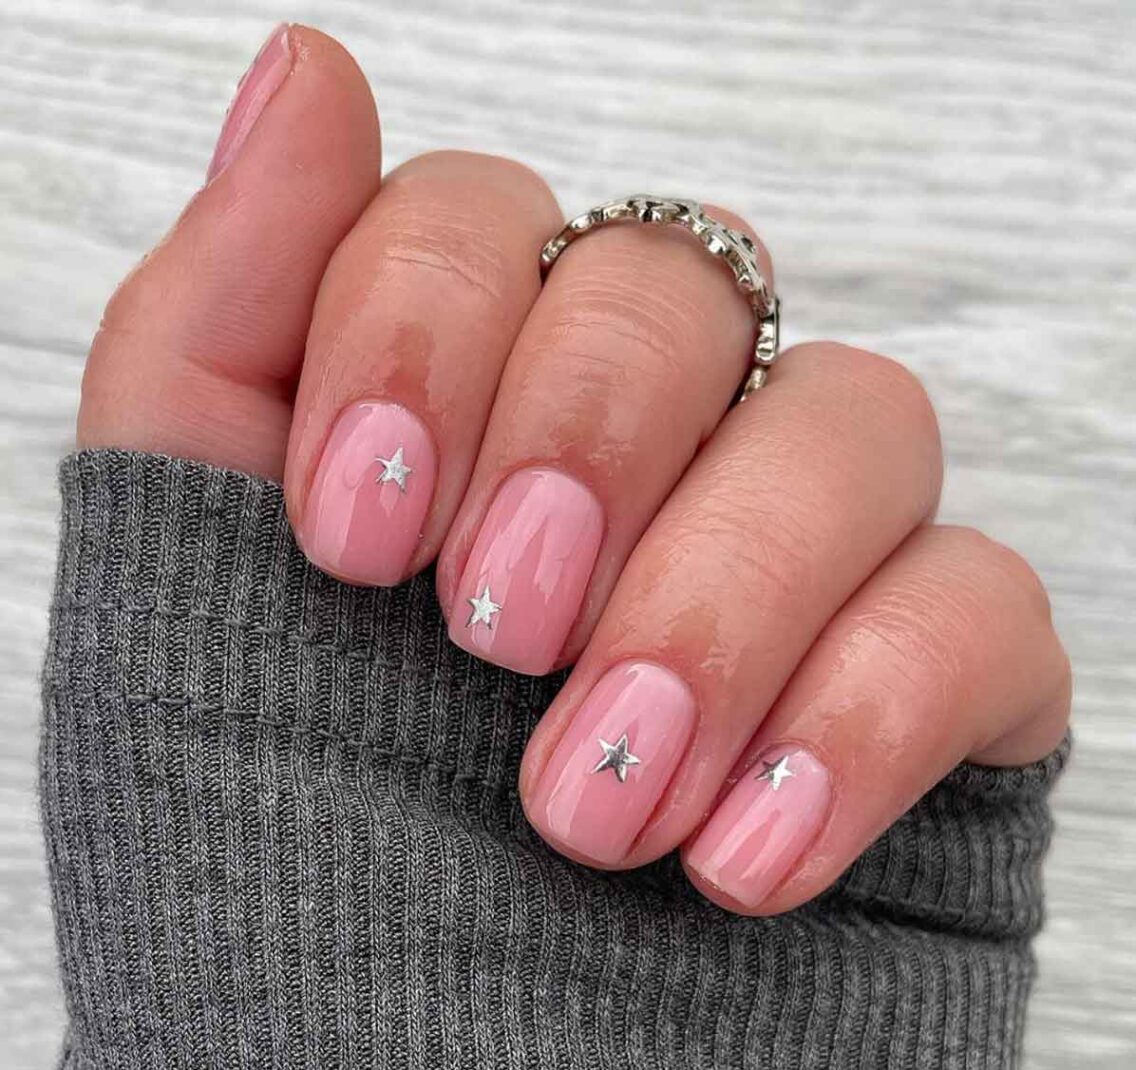 100 Cute Nails To Inspire You (The Best Gallery) - The Trend Scout